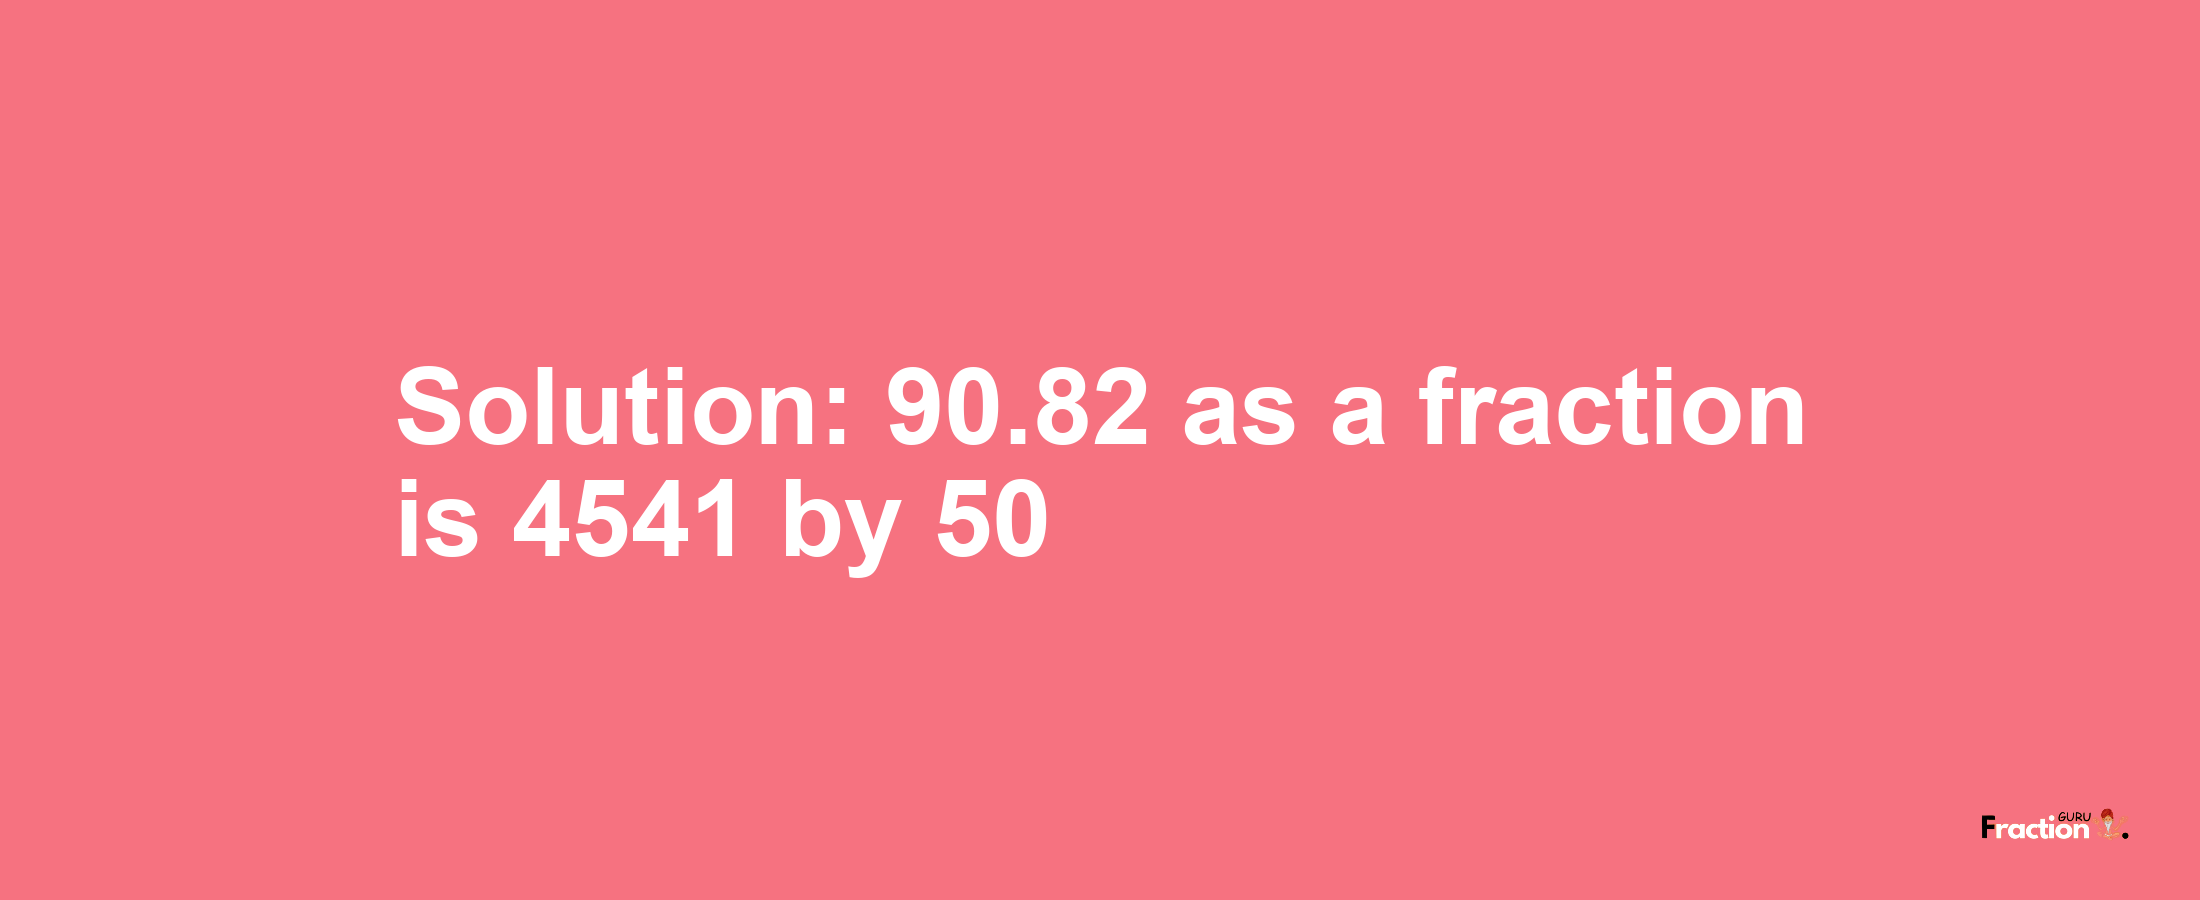 Solution:90.82 as a fraction is 4541/50